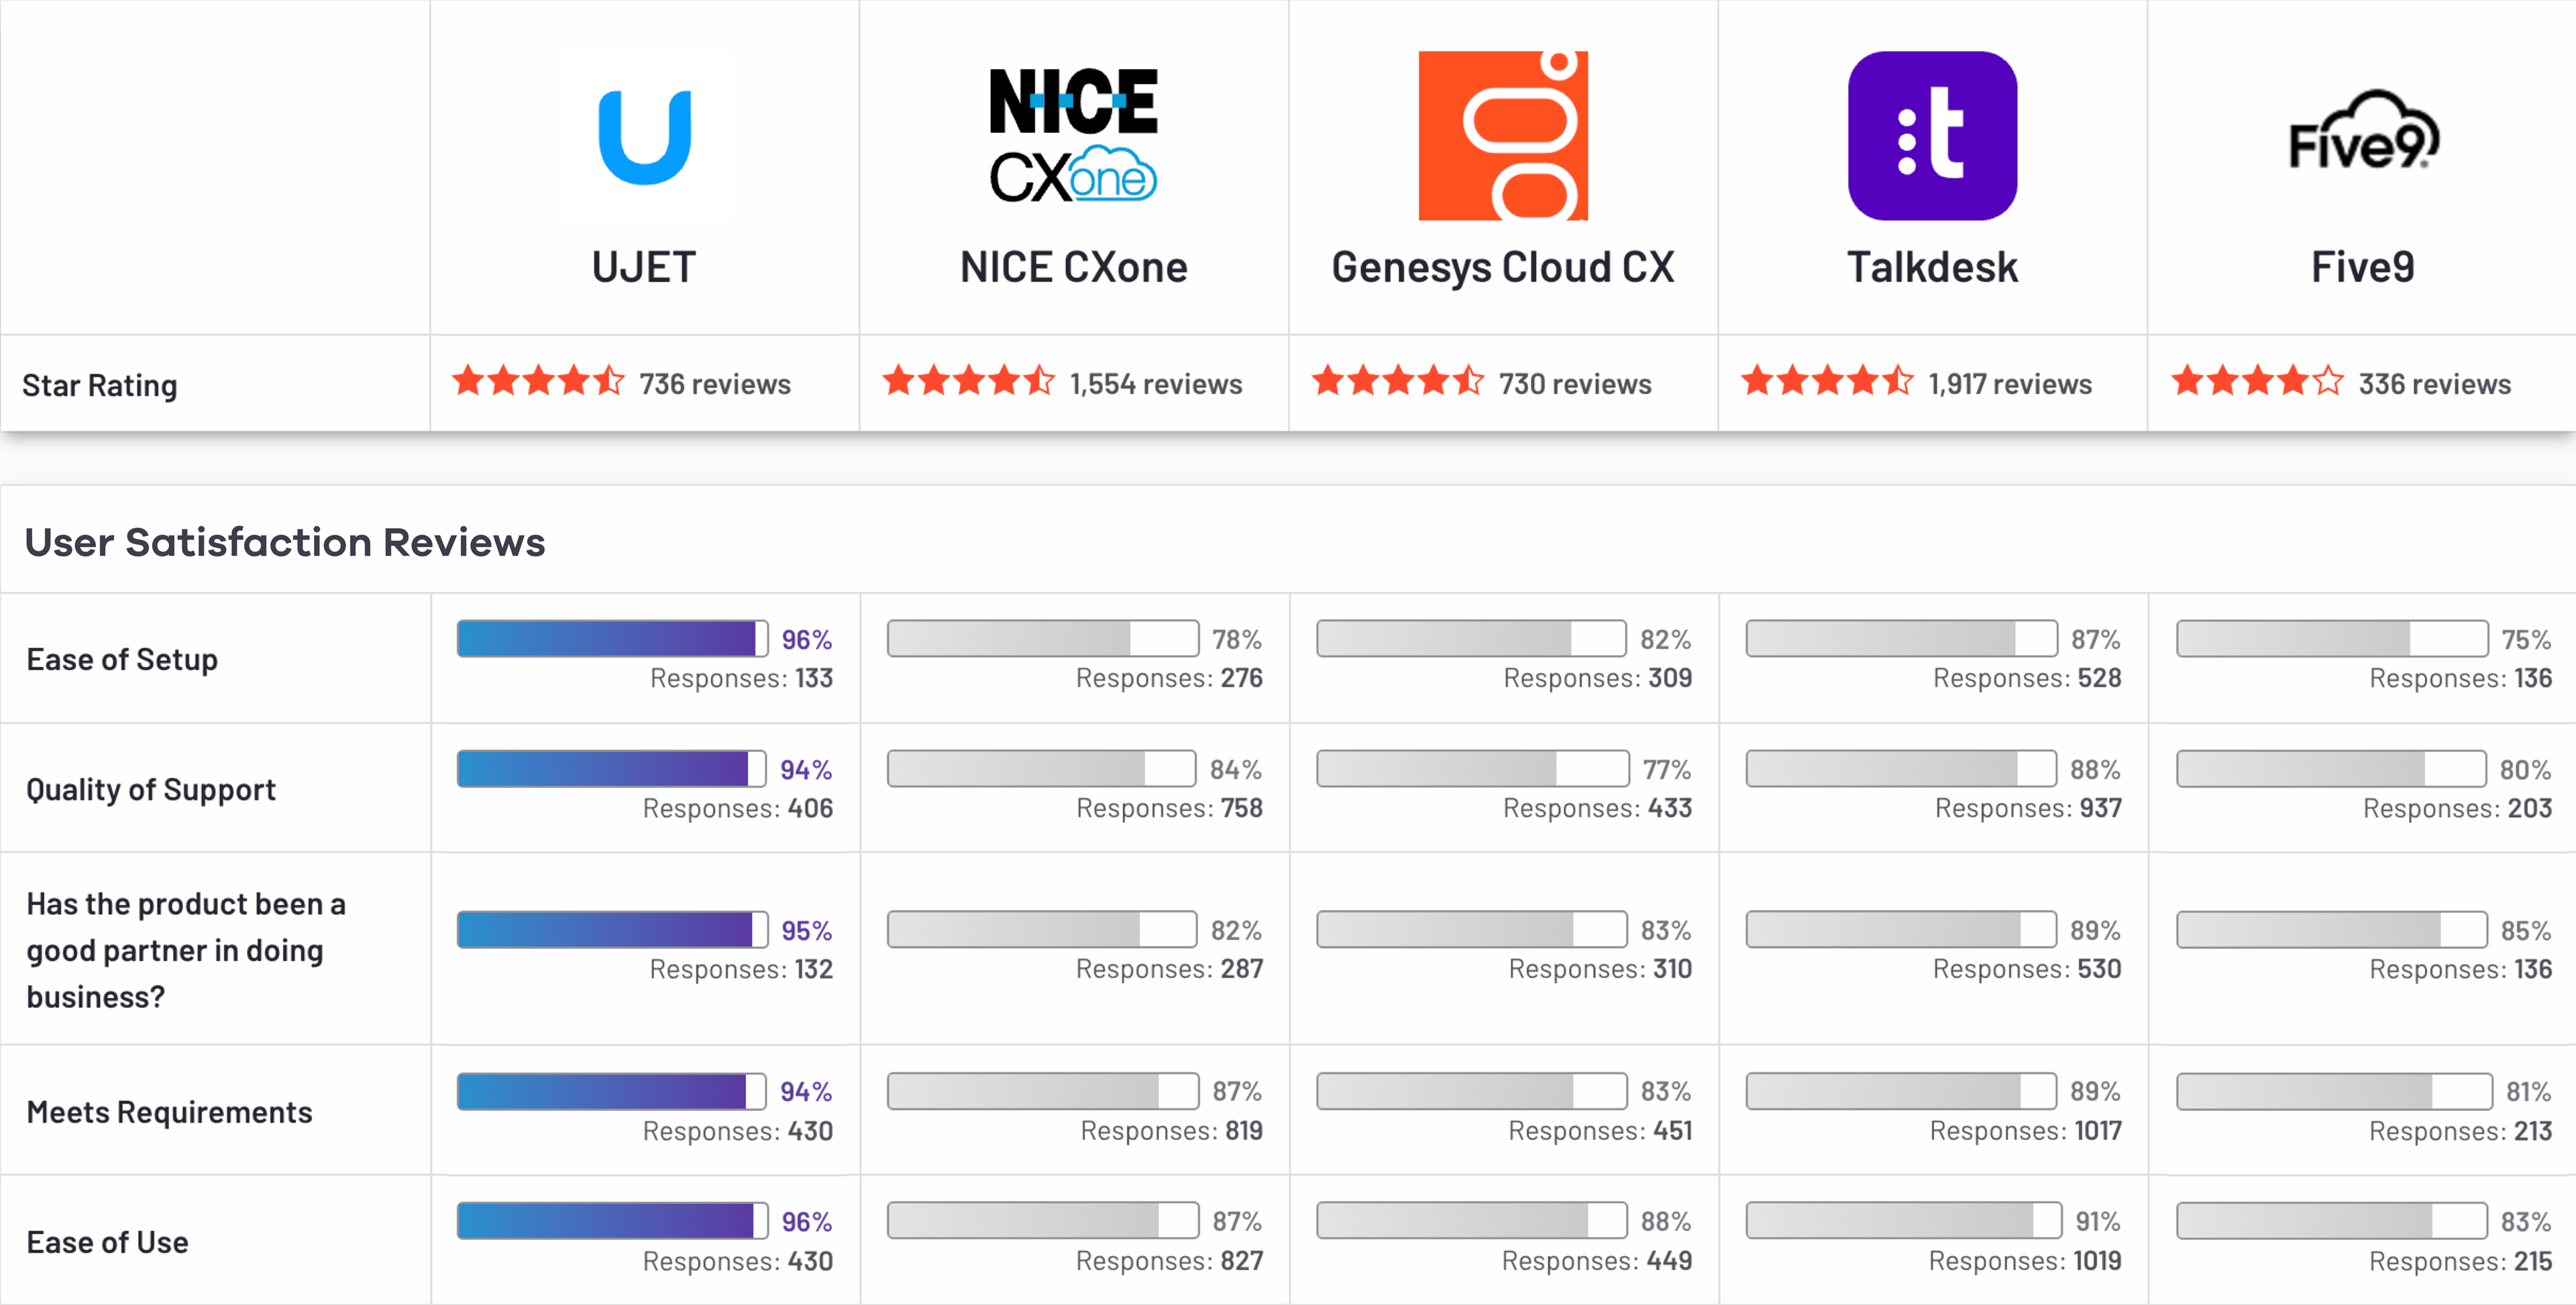 The chart shows UJET Ranks Against Five9, Nice CXone, Genesys Cloud and Talkdesk. UJET ranks #1 on ease of setup, quality of support, ease of doing business with, meets requirements, and ease of use.